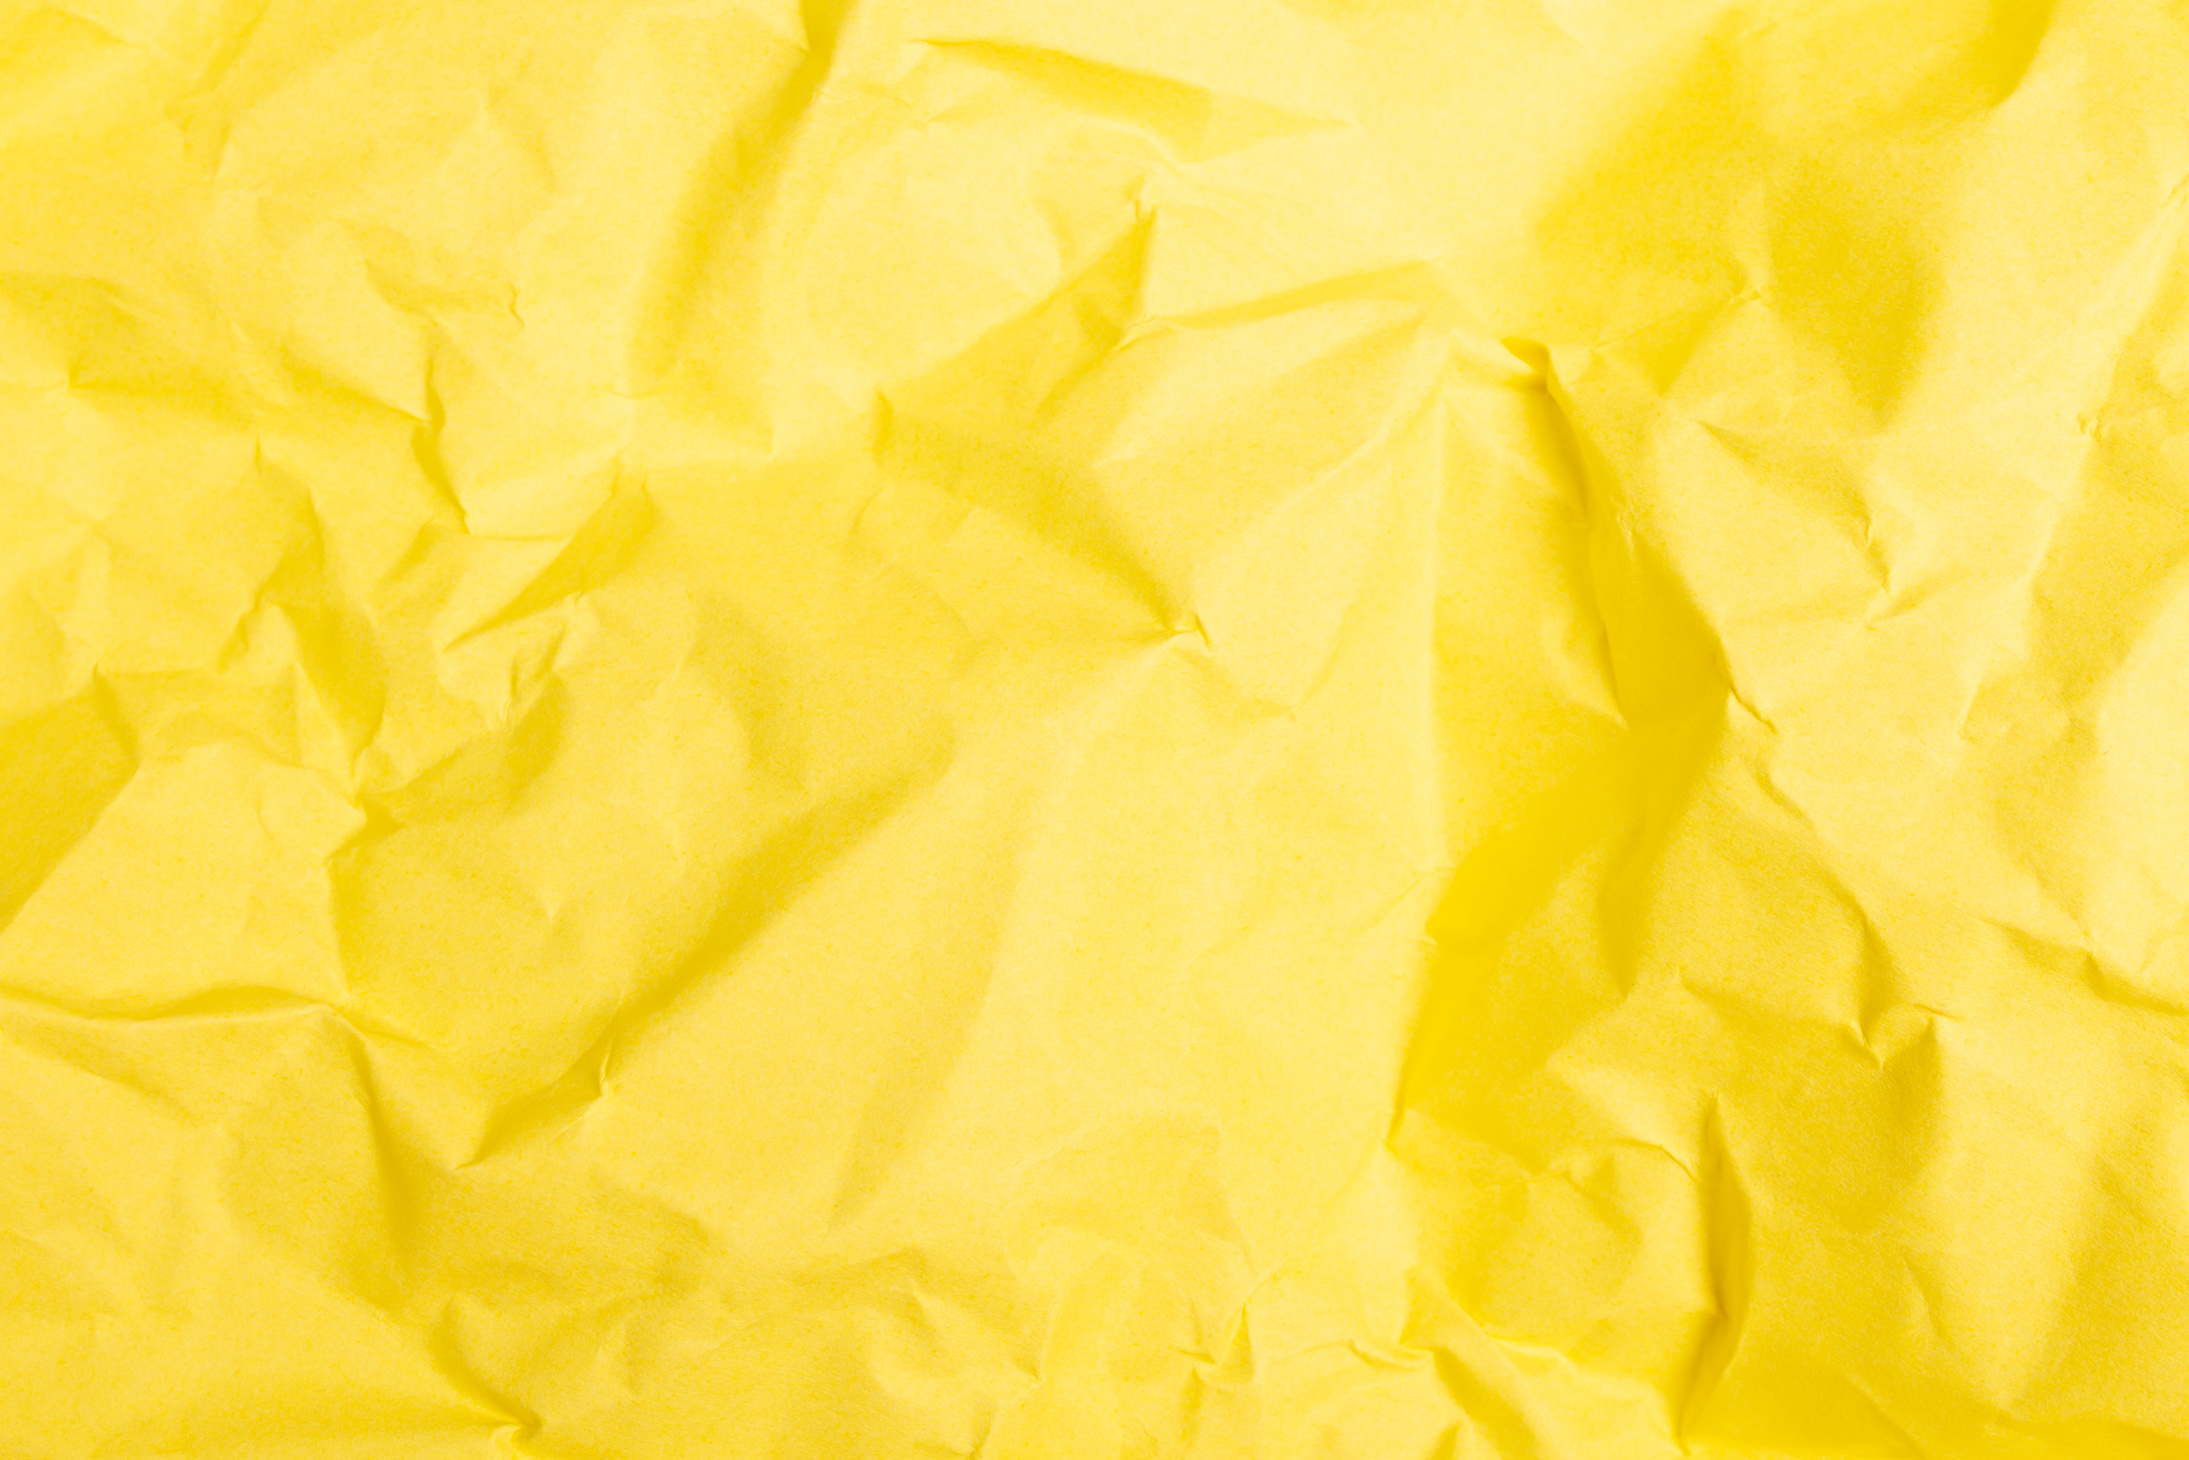 A Close-Up Shot of a Crumpled Yellow Paper